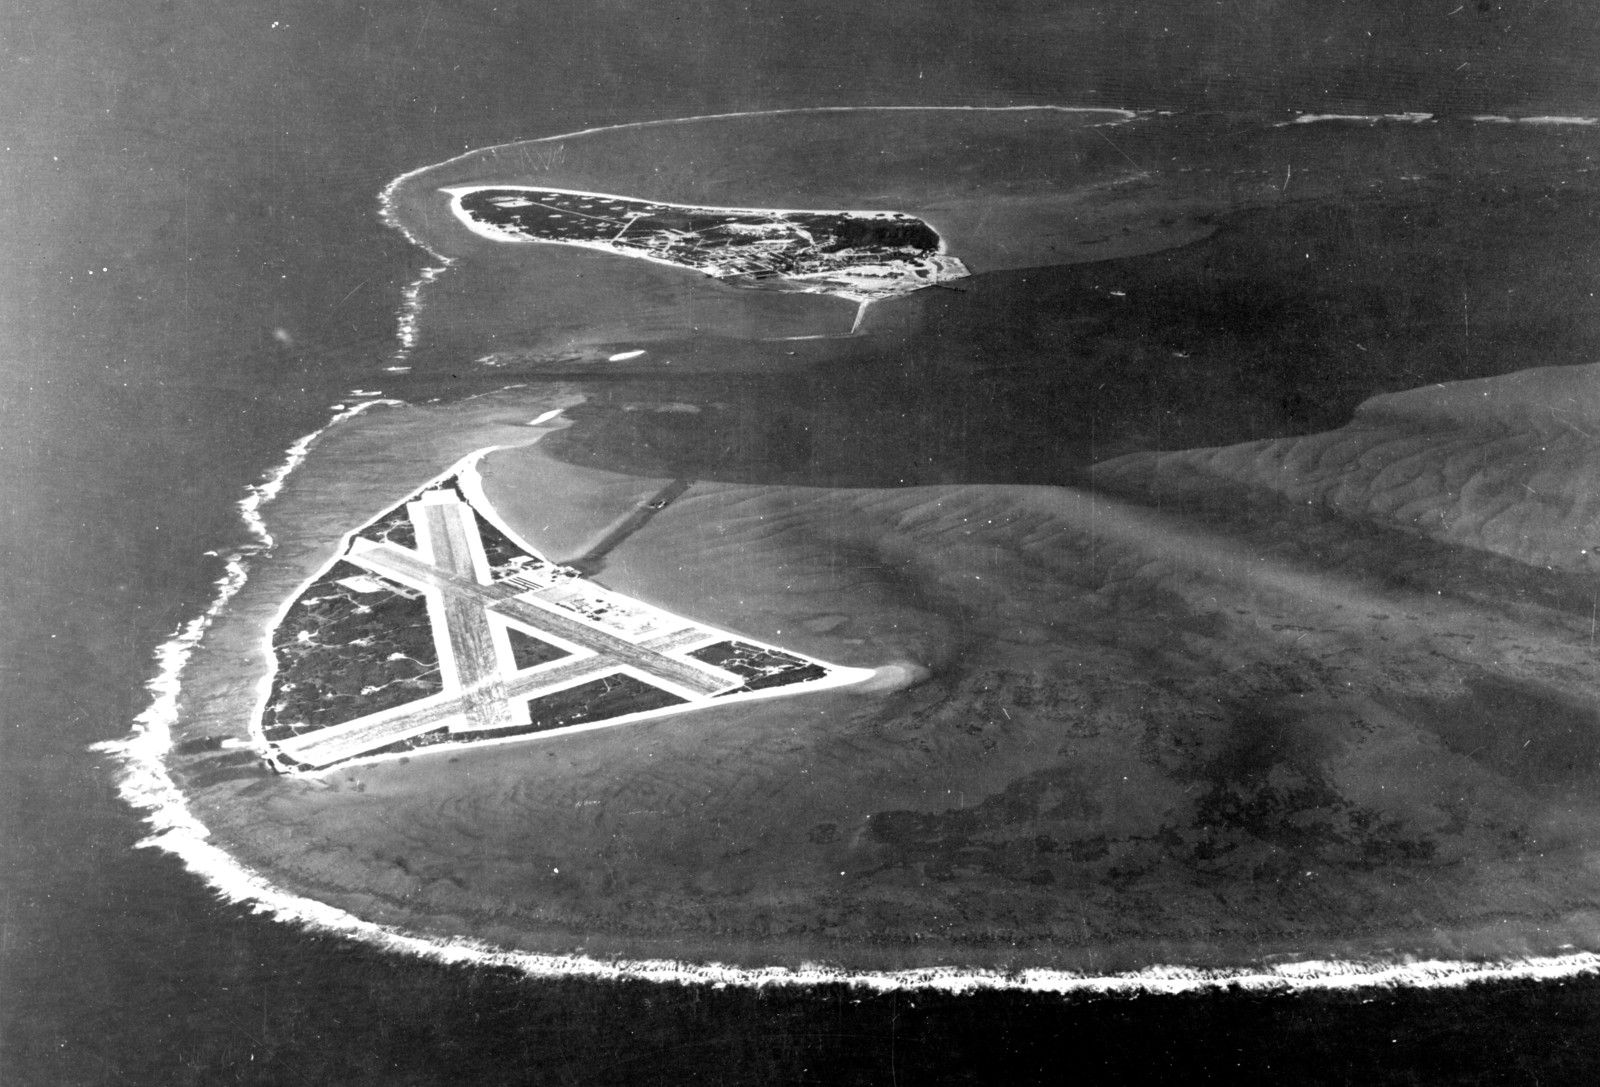 midway islands atoll pacific ocean battle of 1942